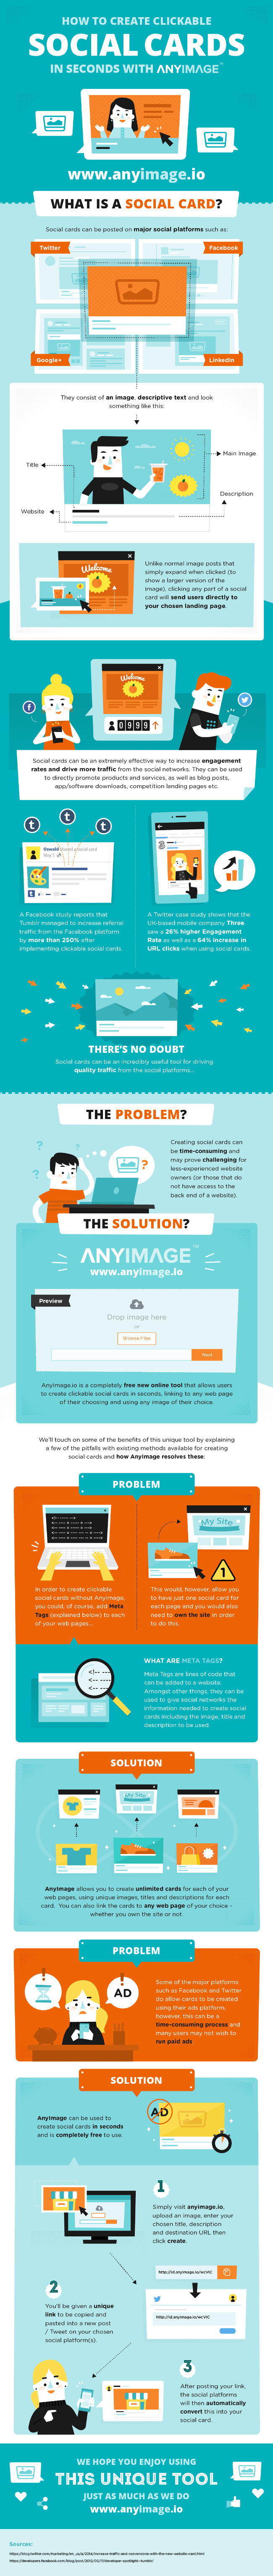 AnyImage.io shows you how to turn your images into clickable social cards